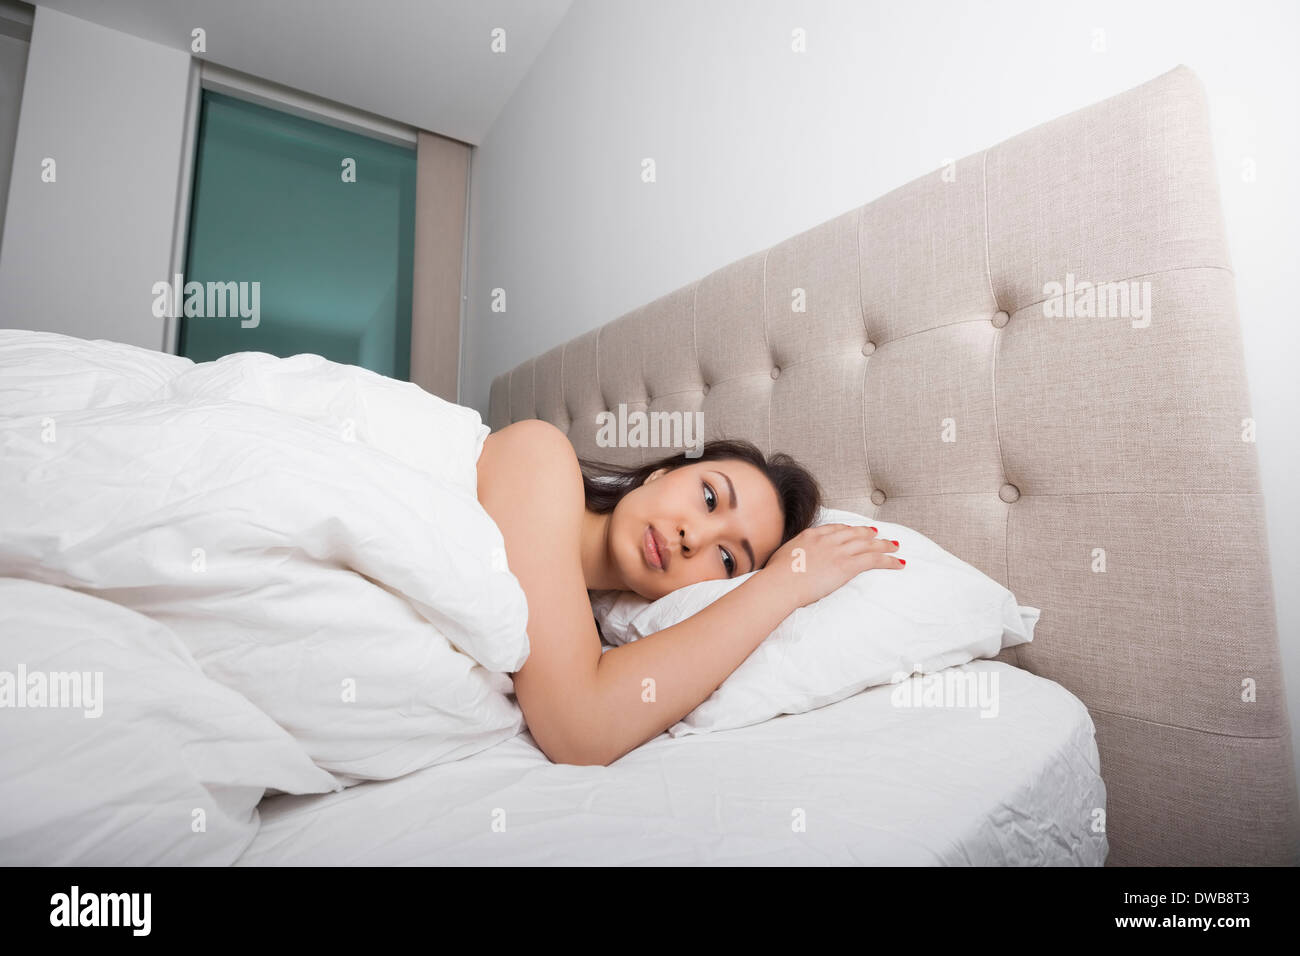 Thoughtful young woman lying in bed Stock Photo